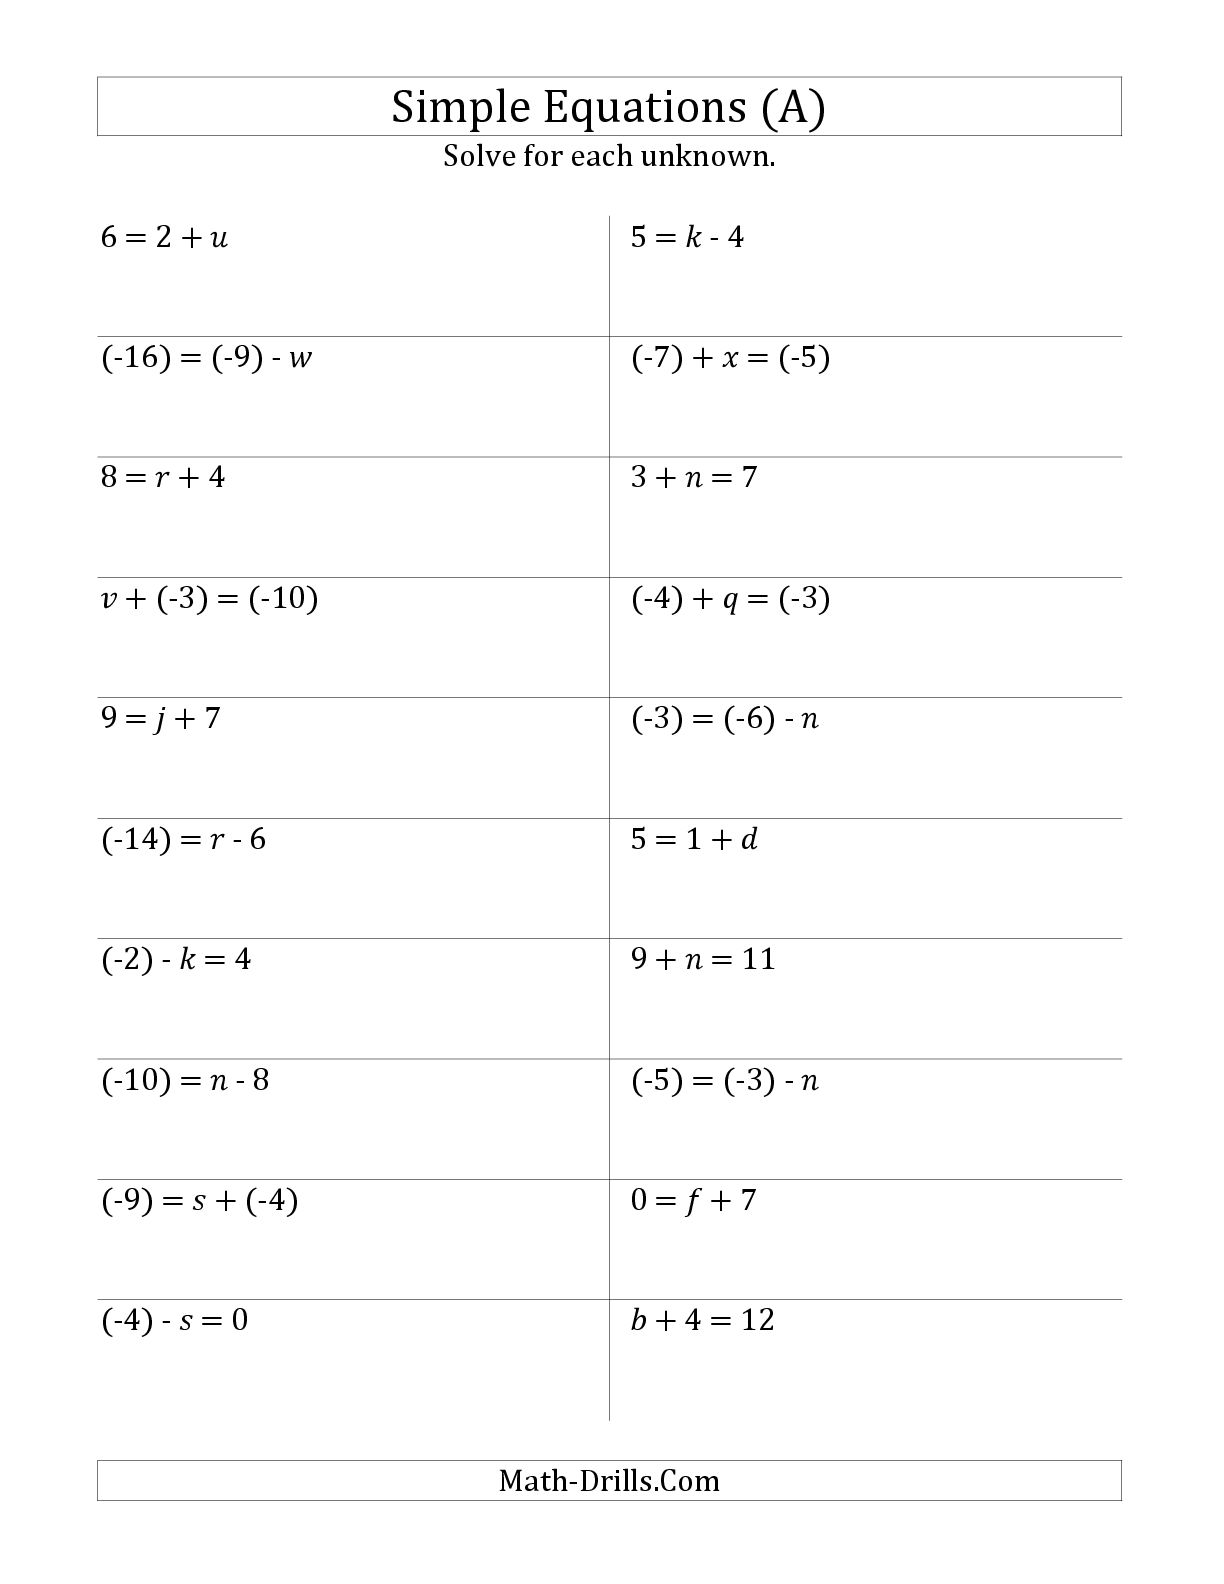 Solving One Step Equations Worksheets